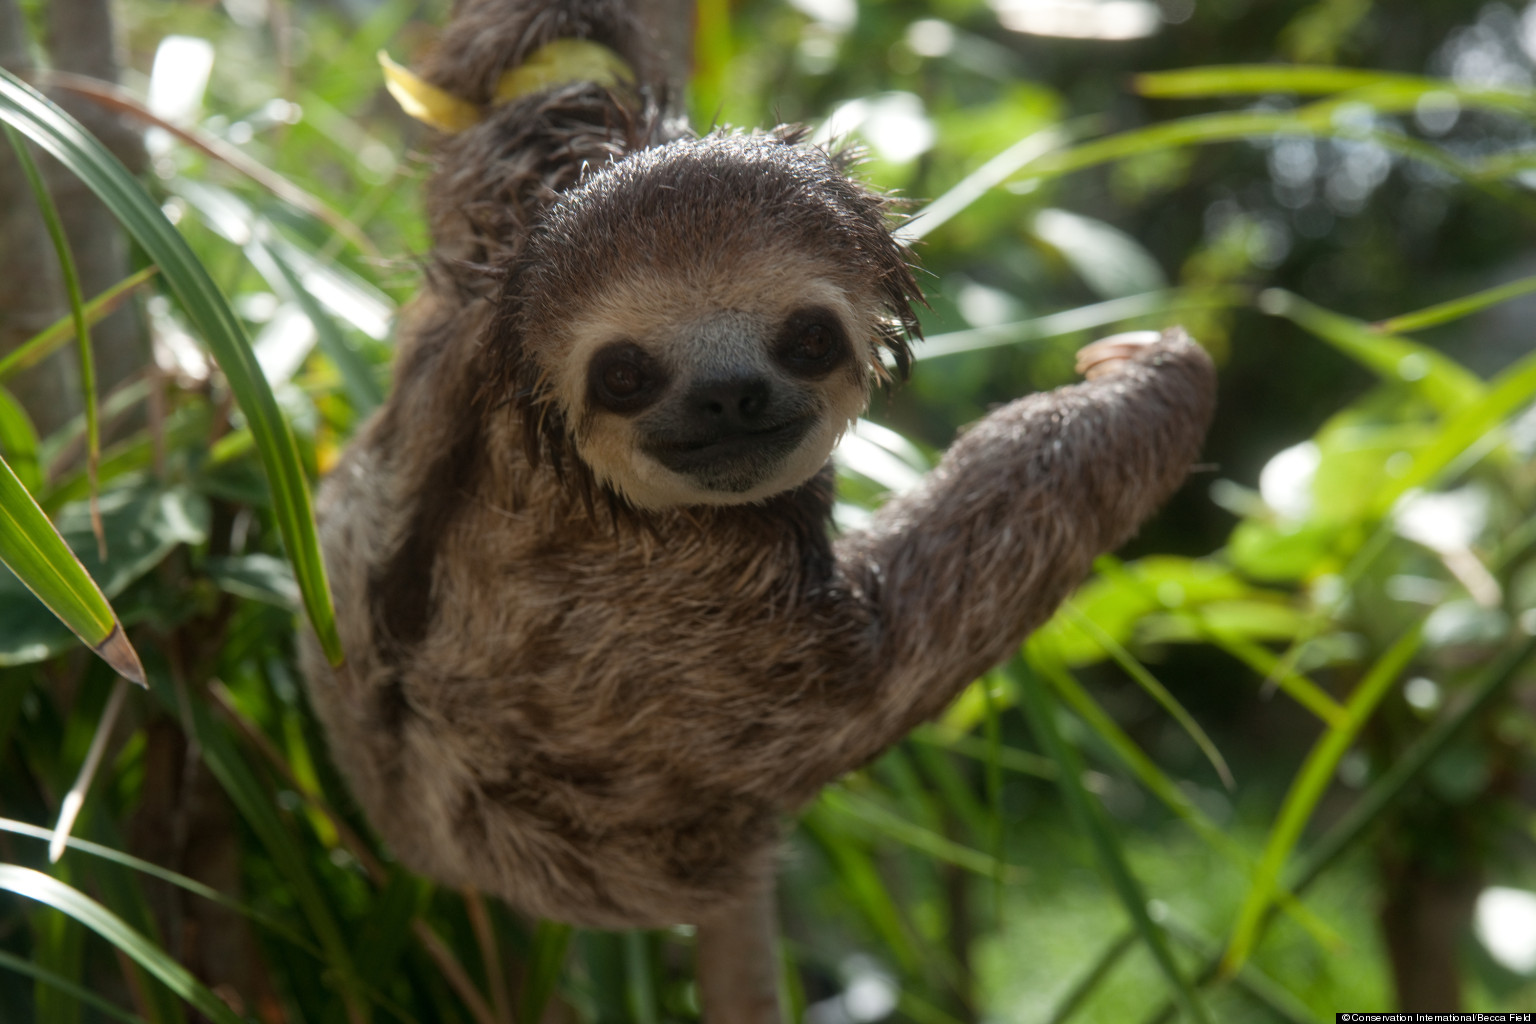 Sloth Image Feature Photogenic Creatures Rescued After Home Destroyed